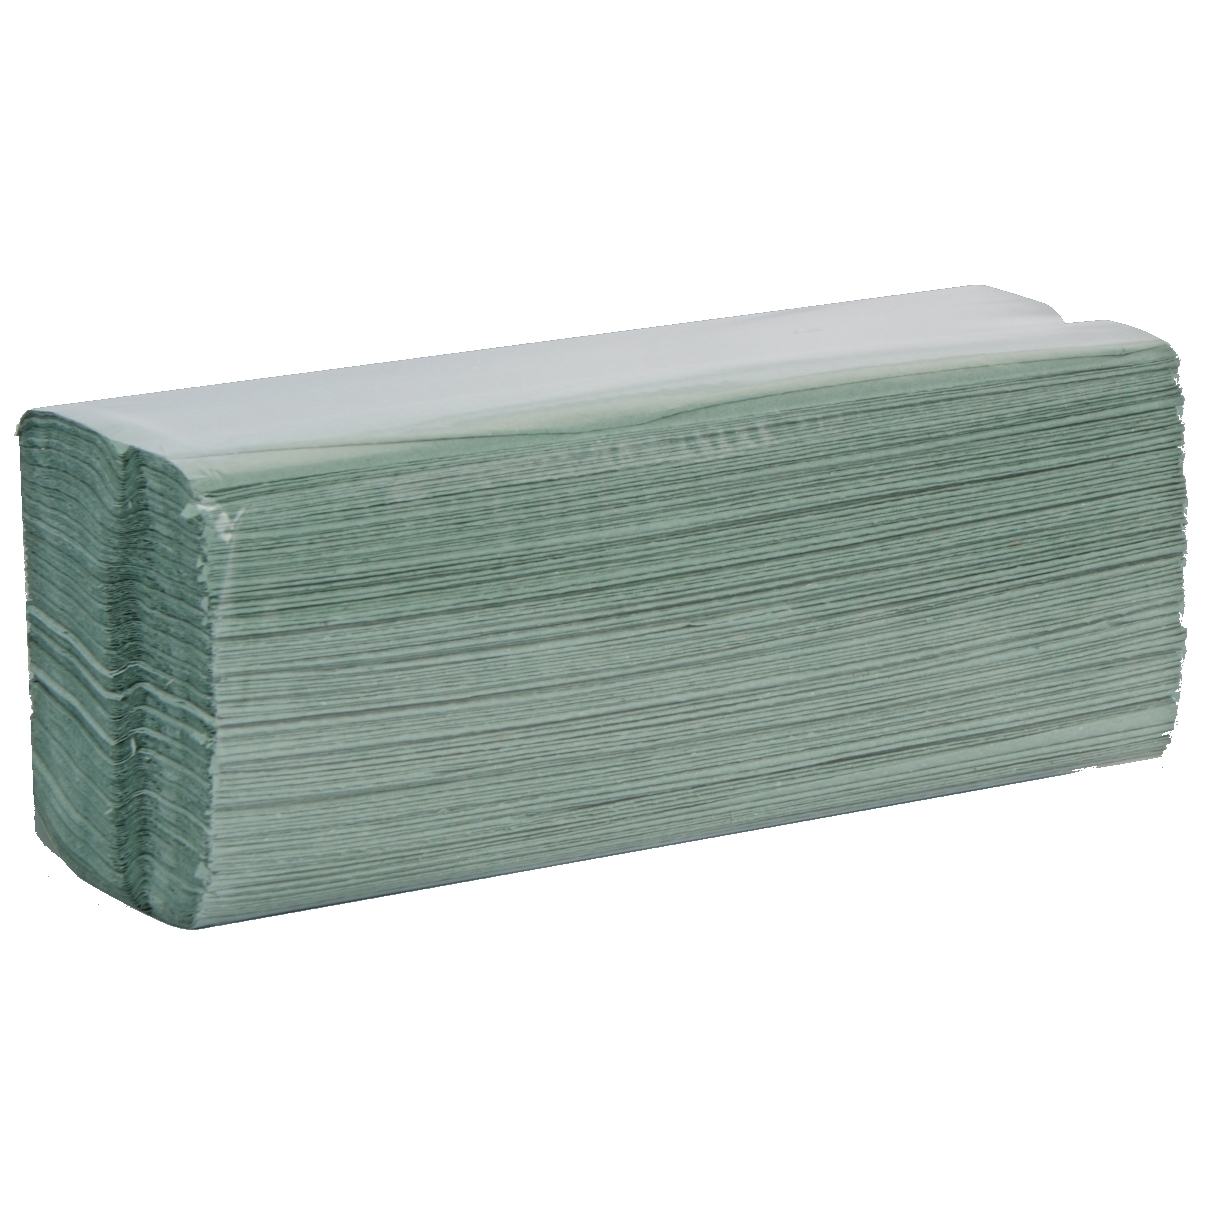 Free Next Day Delivery 2Work C-Fold Hand Towels 1Ply 2880 Sheets Green 